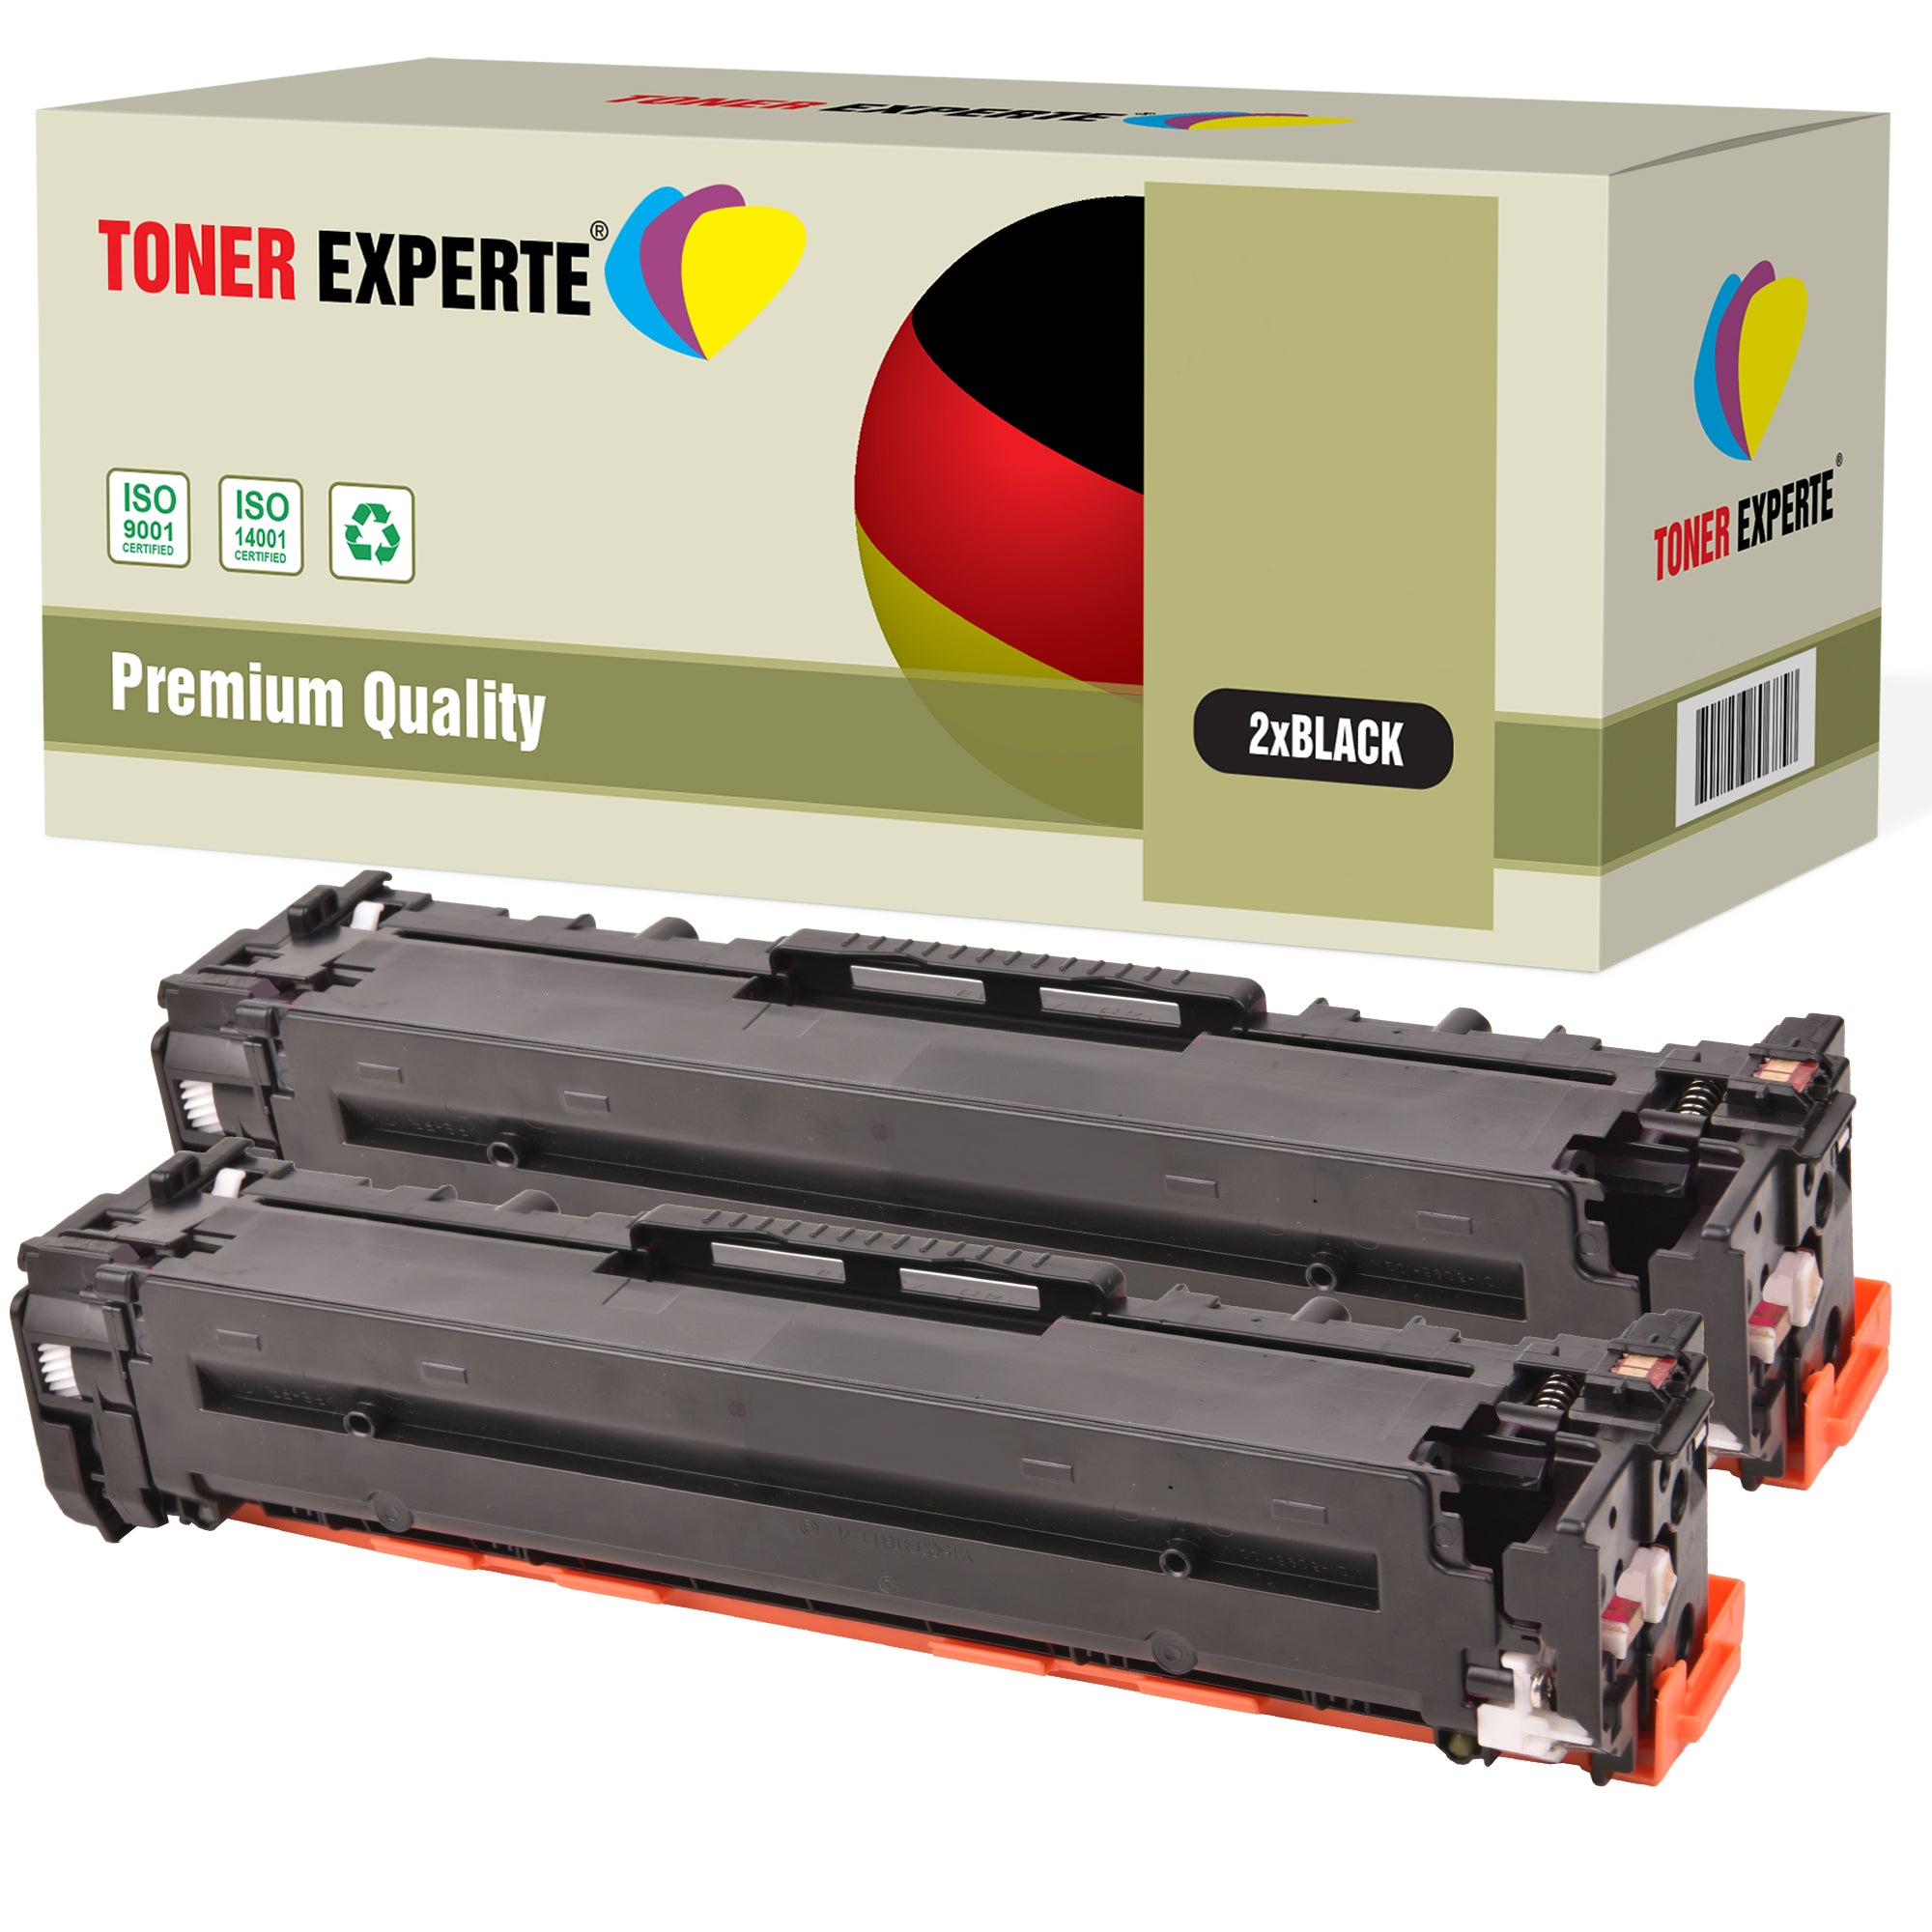 Toner Cartridges Replacement for HP 125A - Toner Experte